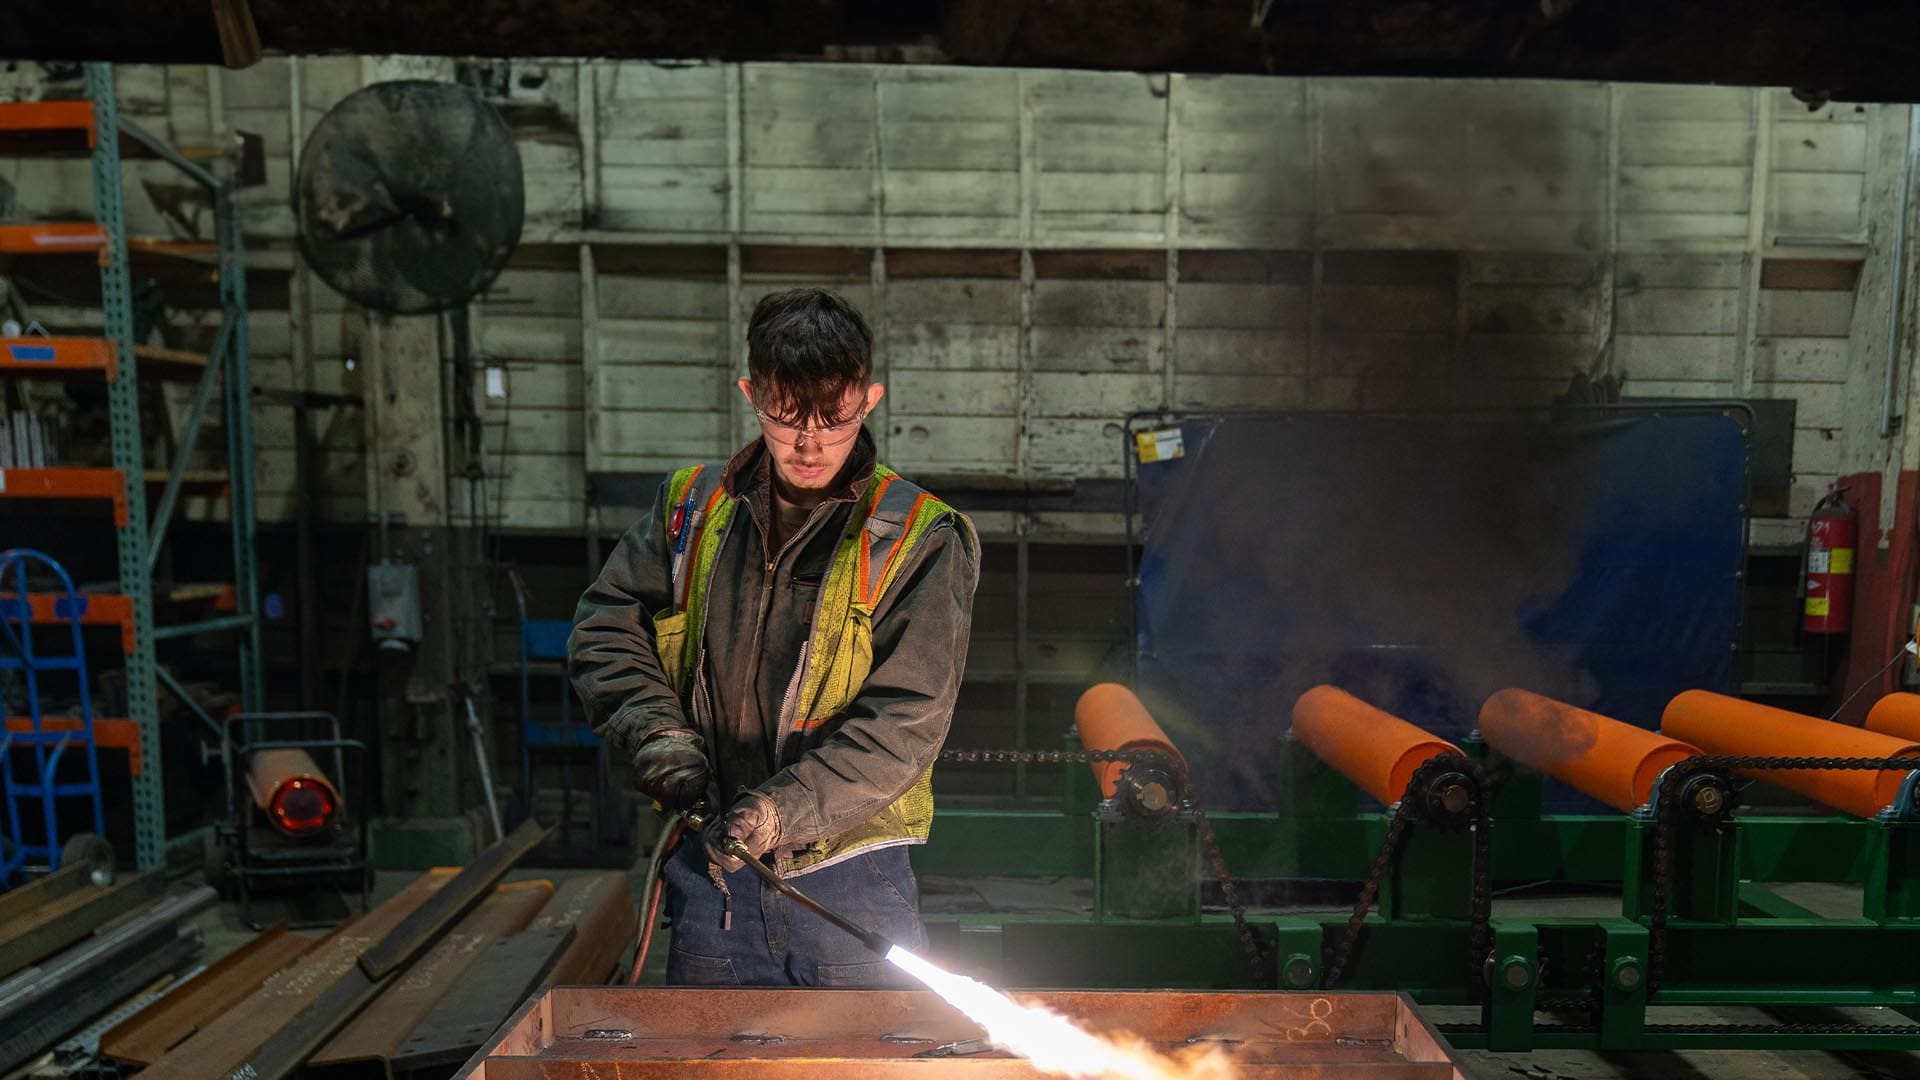 AJAC apprentice from Sierra Pacific Industries works on the shop floor during his youth apprenticeships